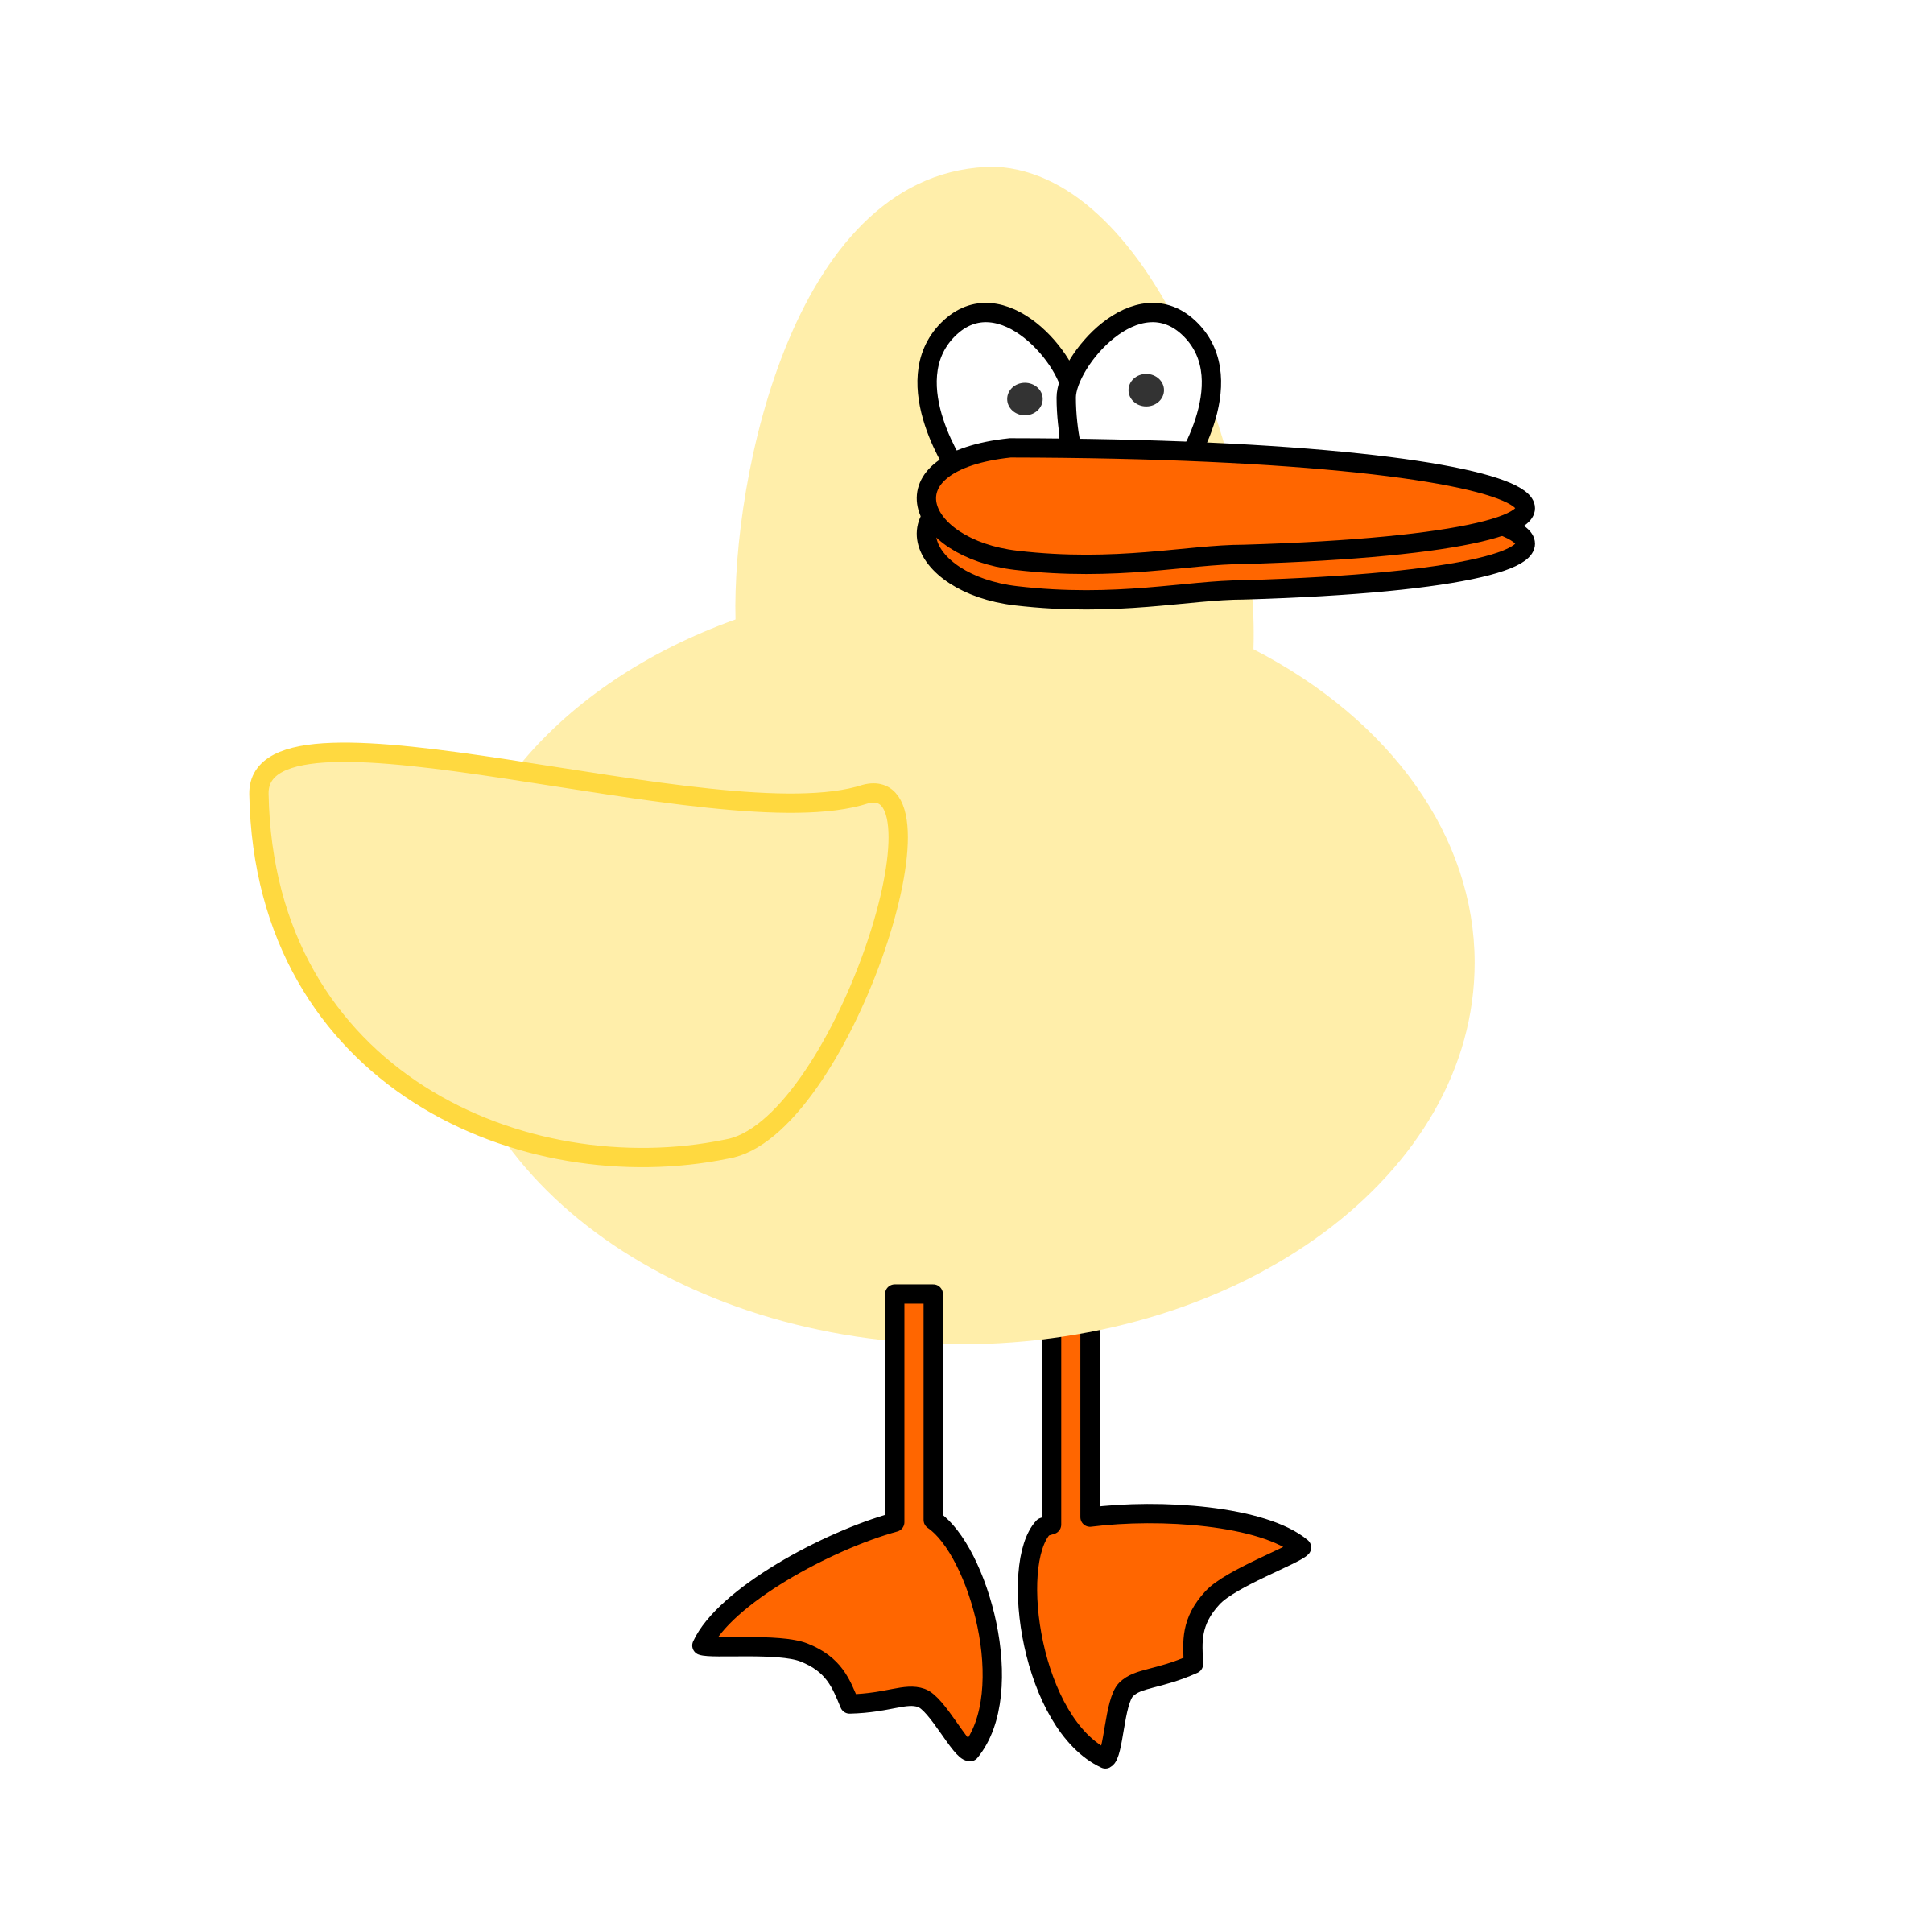 Ducks clipart mama duck. Silly pencil and in